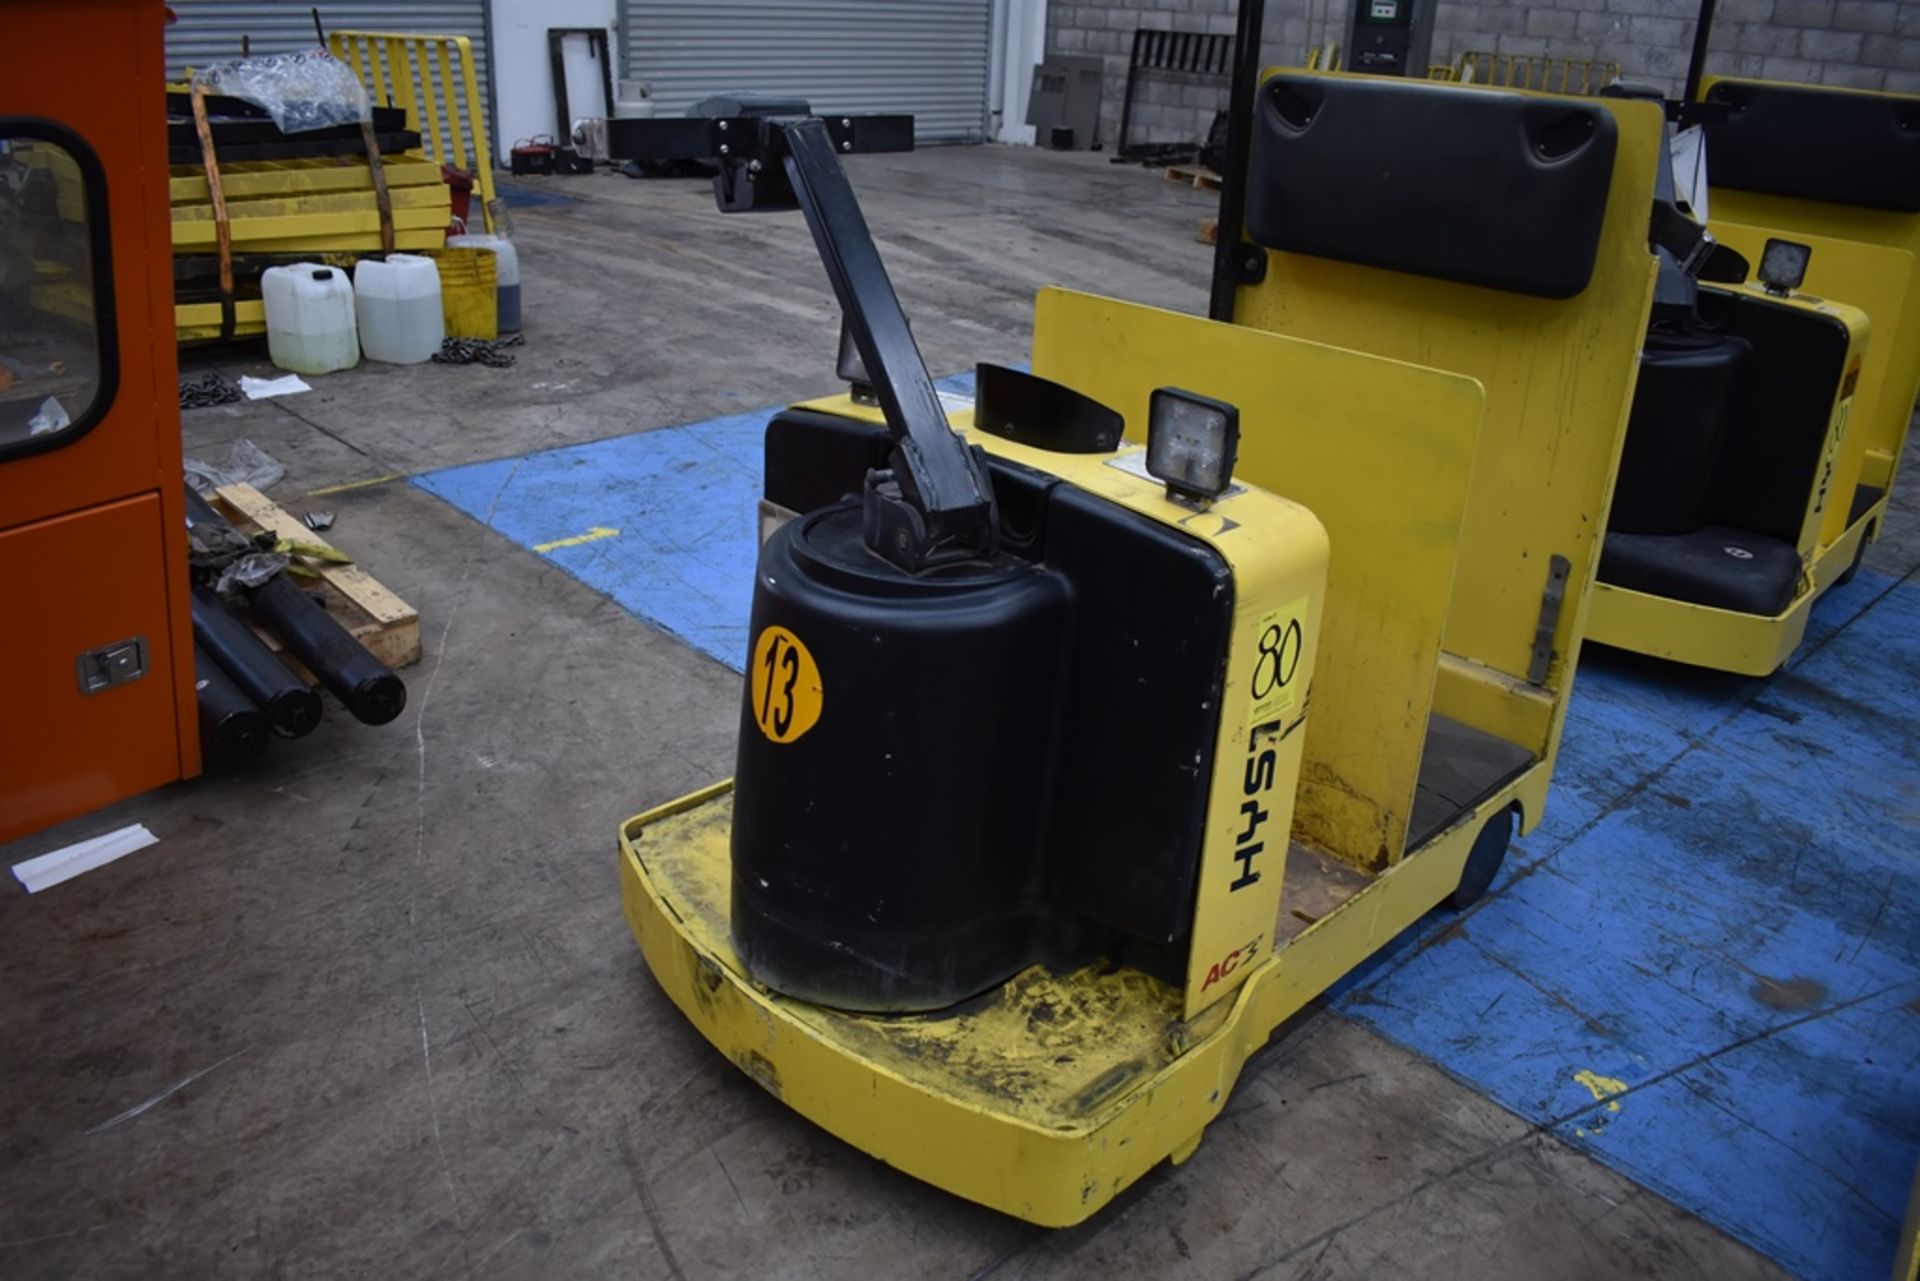 (2) Hyster electric Tow Tractor, model T7ZAC, 4000 lb capacity